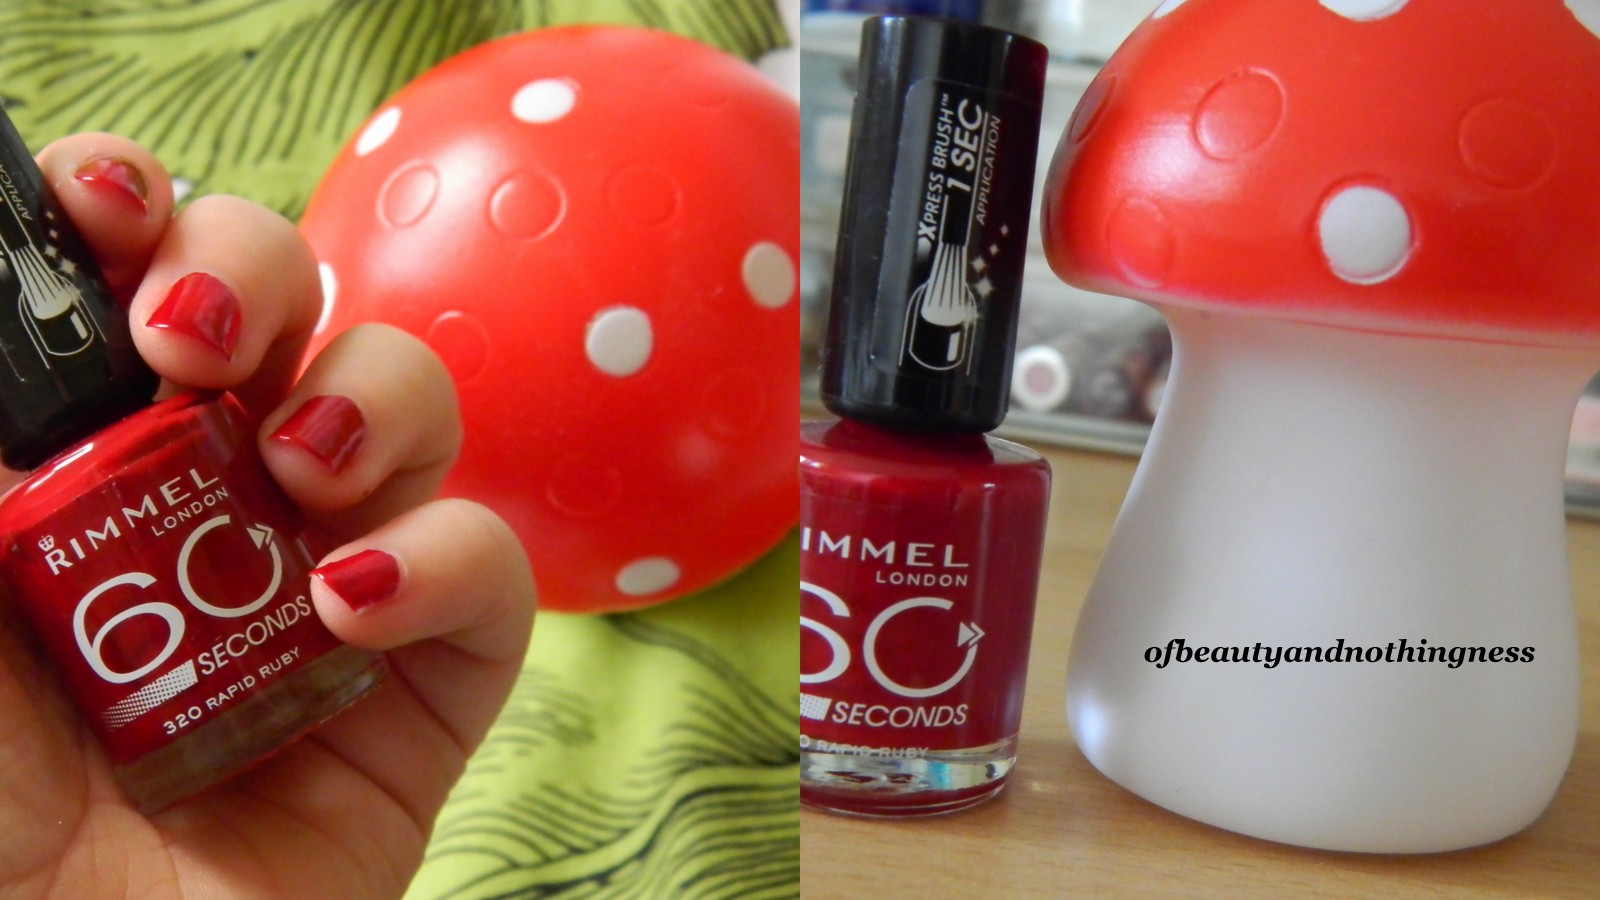 Rimmel Super Gel Nail Varnish Review and Swatch - Sophie Laura